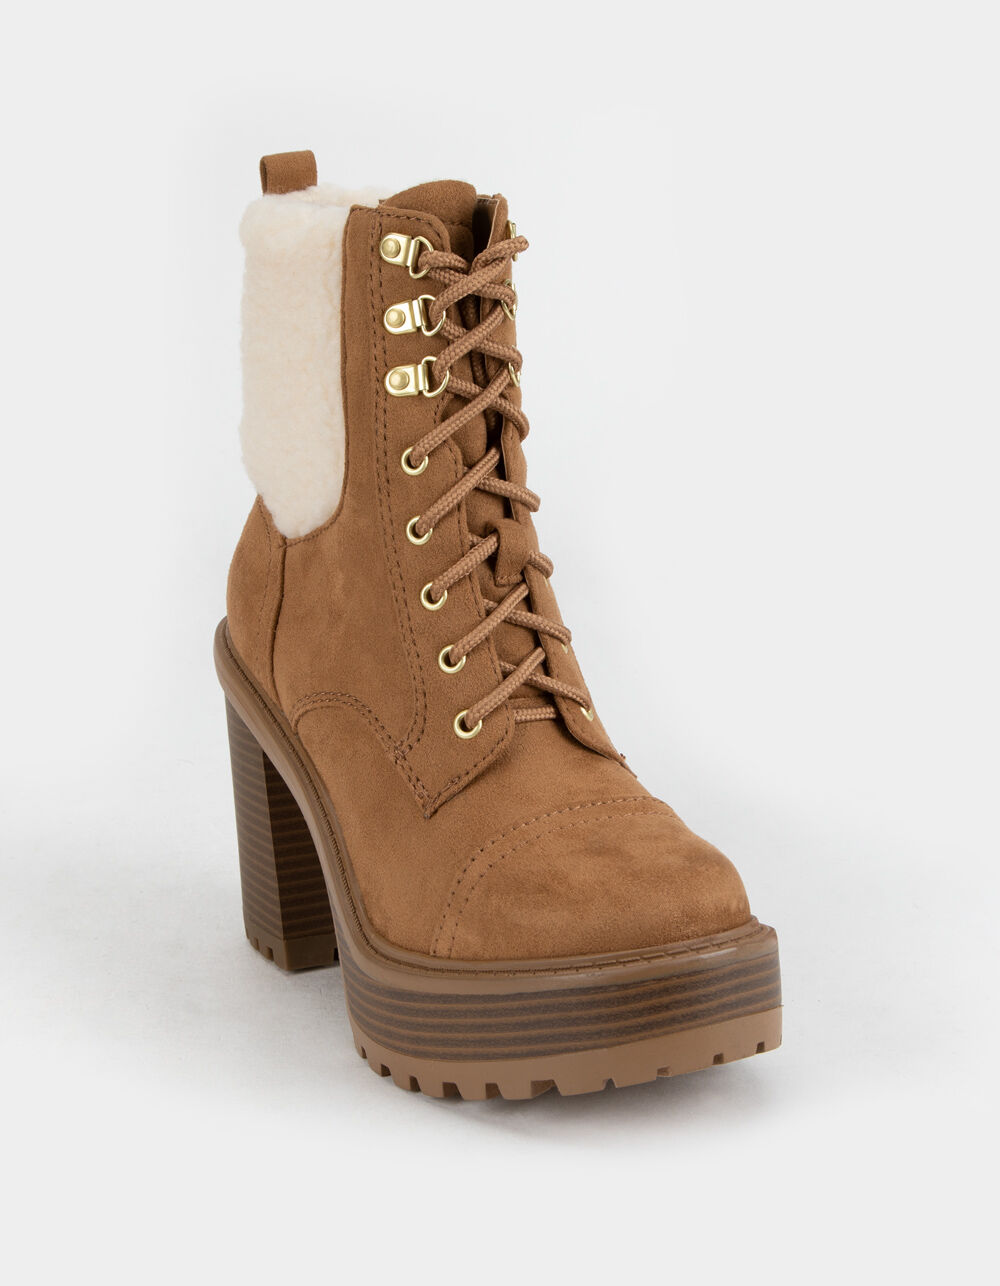 SODA Platform Lace Up Shearling Womens Booties - CHESTNUT | Tillys